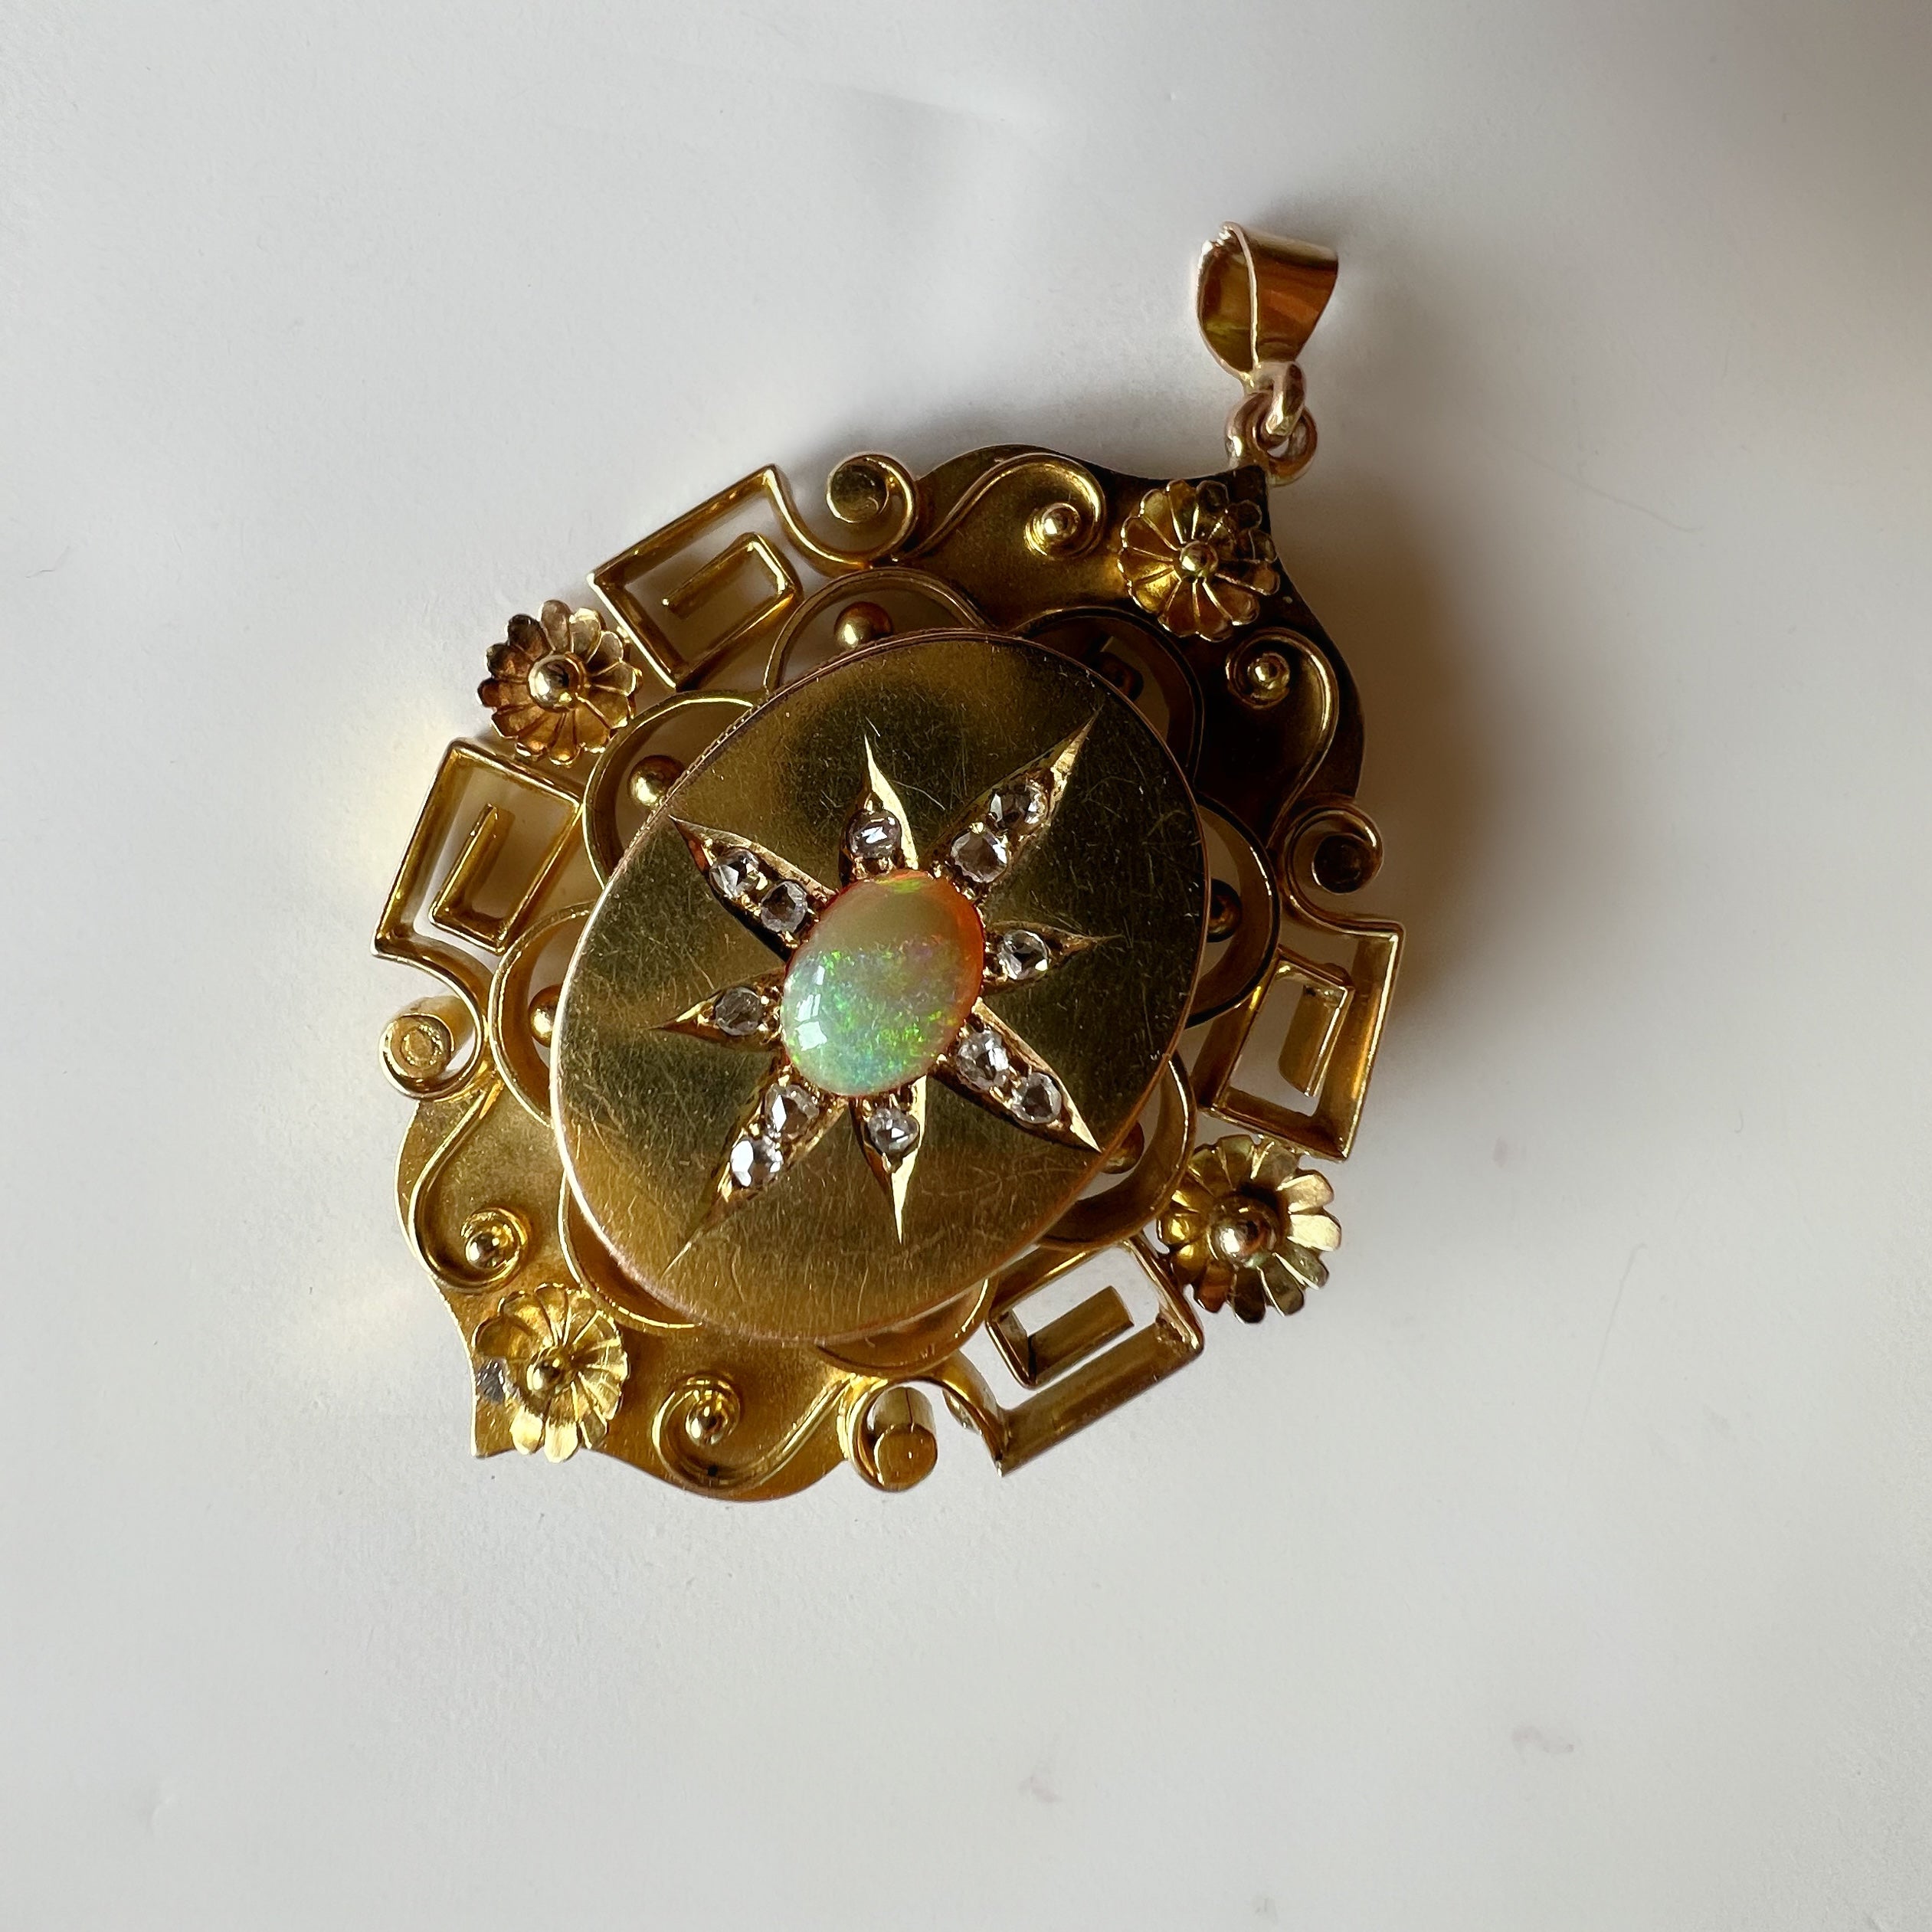 Antique 15ct Gold, Opal and Diamond Pendant